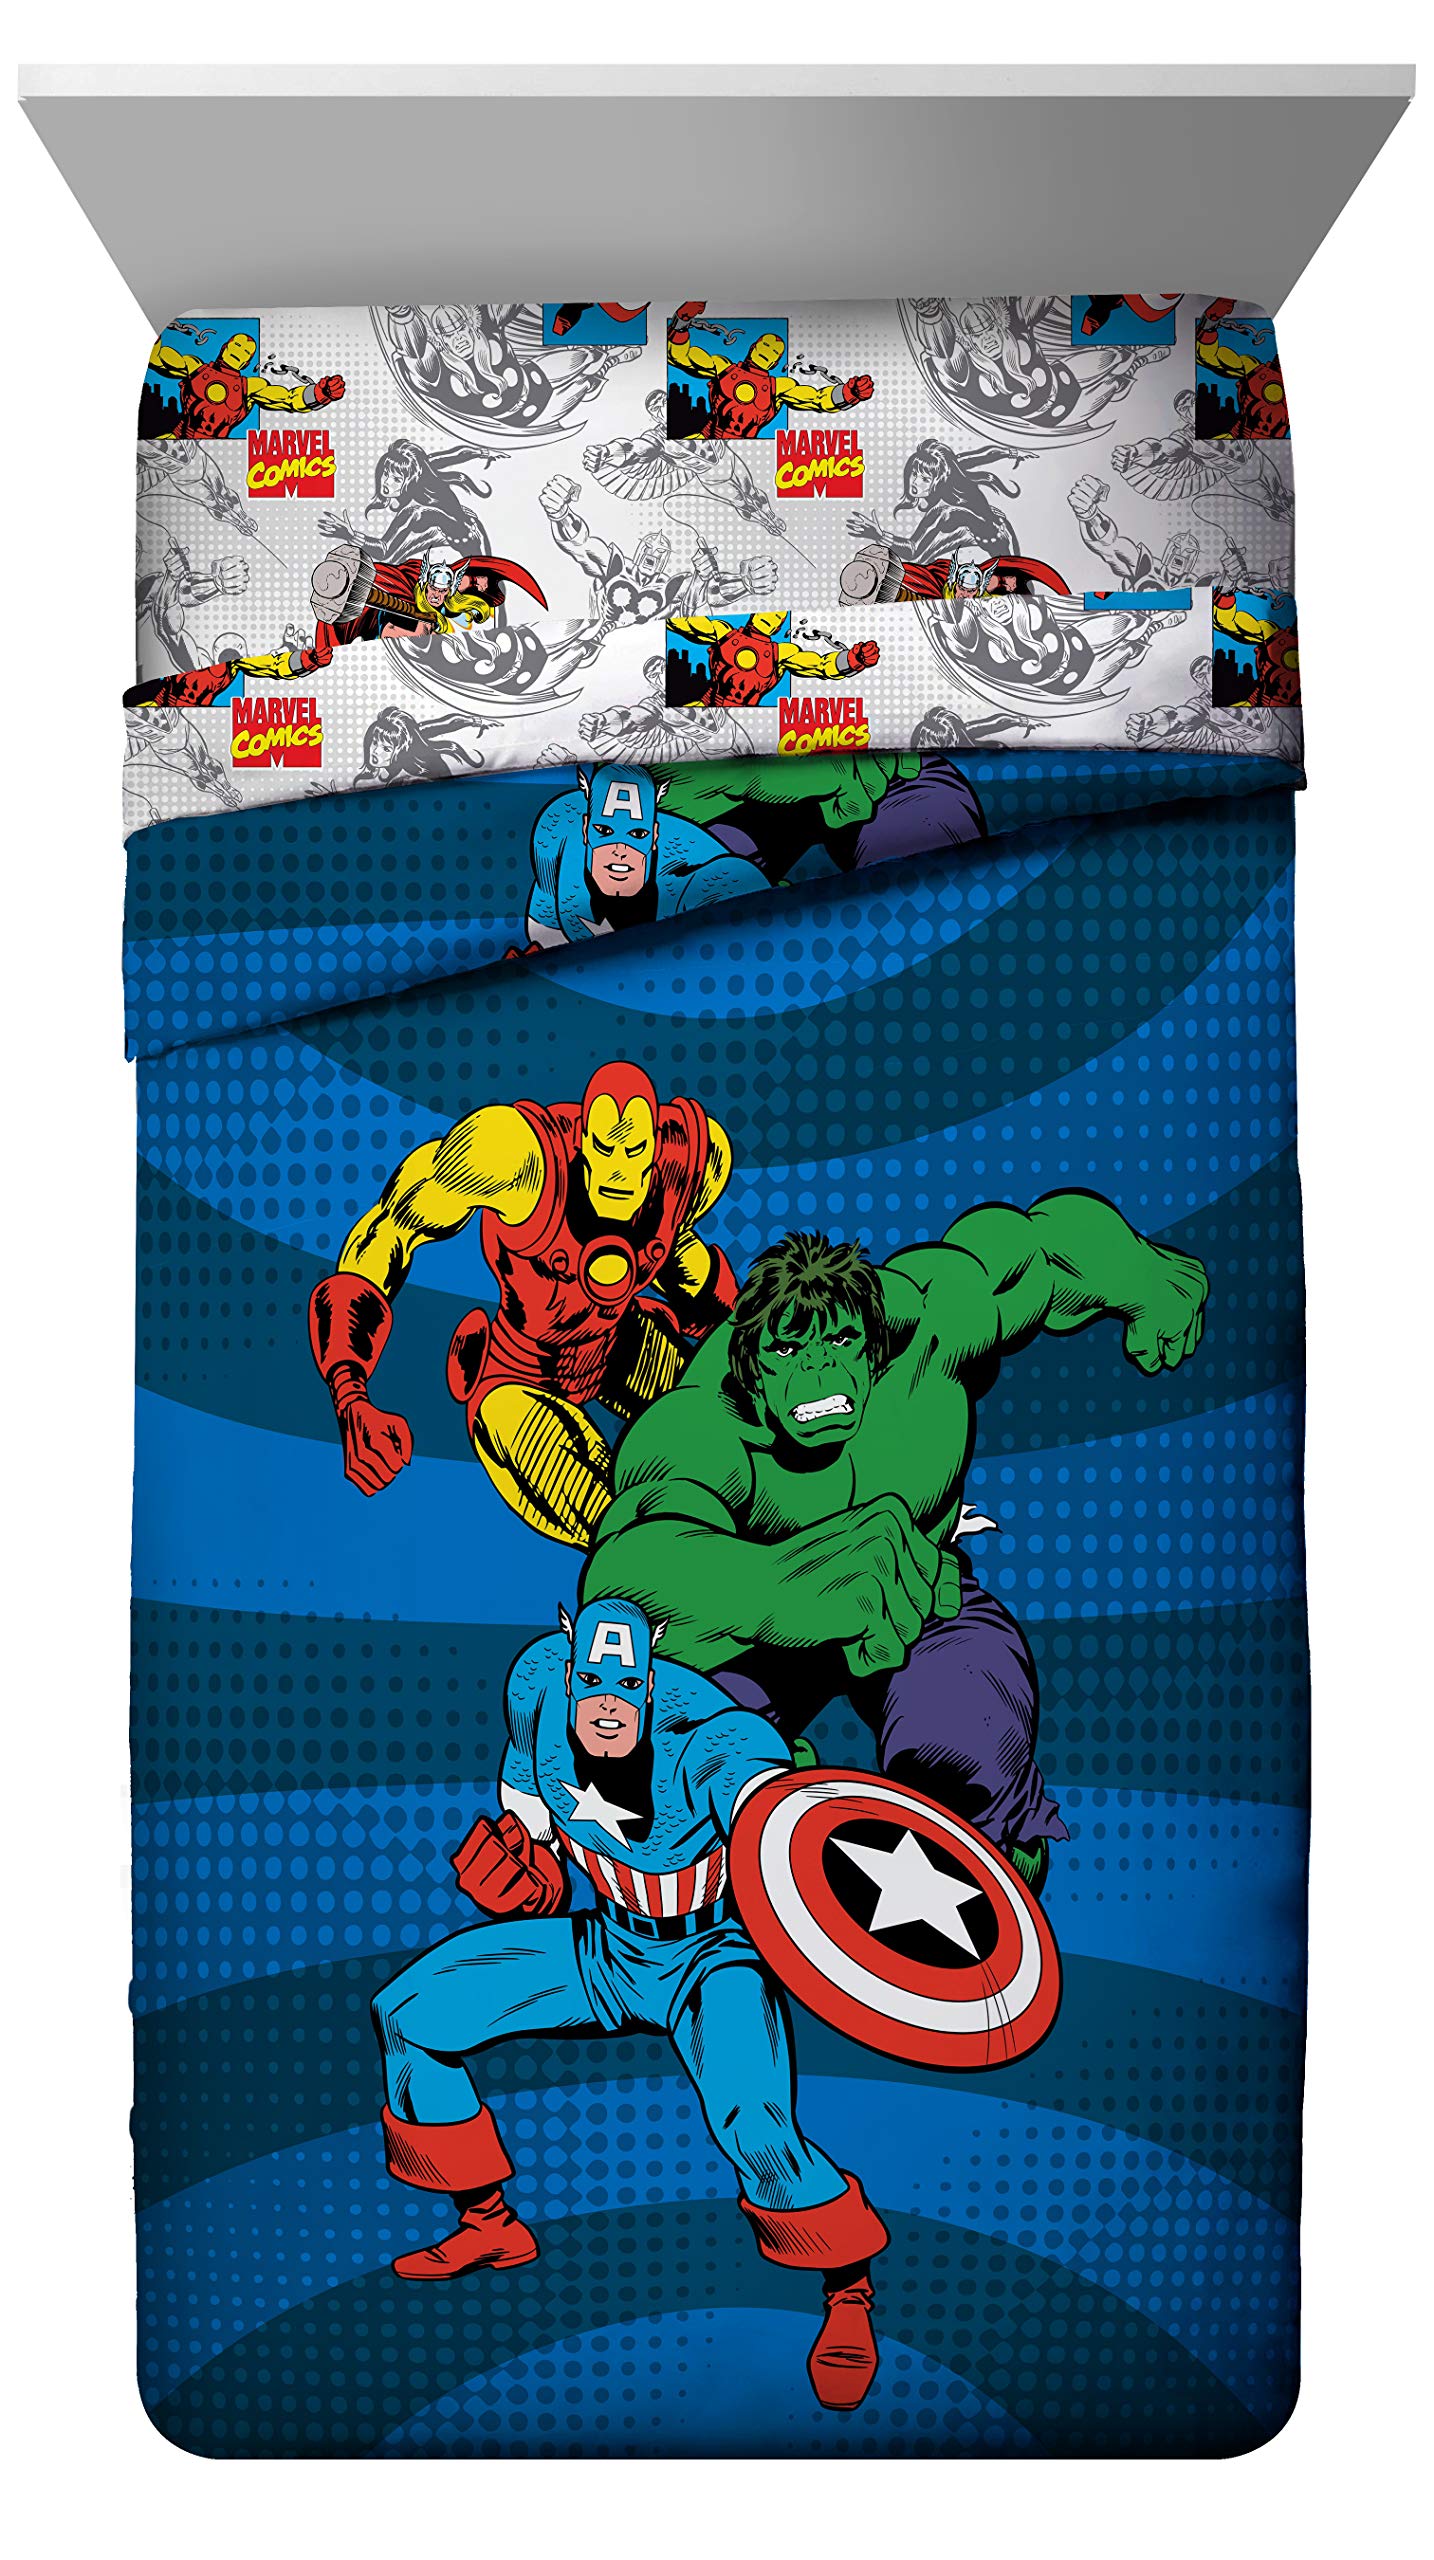 Book Cover Marvel Avengers Good Guys Twin/Full Comforter - Super Soft Kids Reversible Bedding features Iron Man, Hulk, Captain America, and Spiderman - Fade Resistant Polyester (Official Marvel Product)